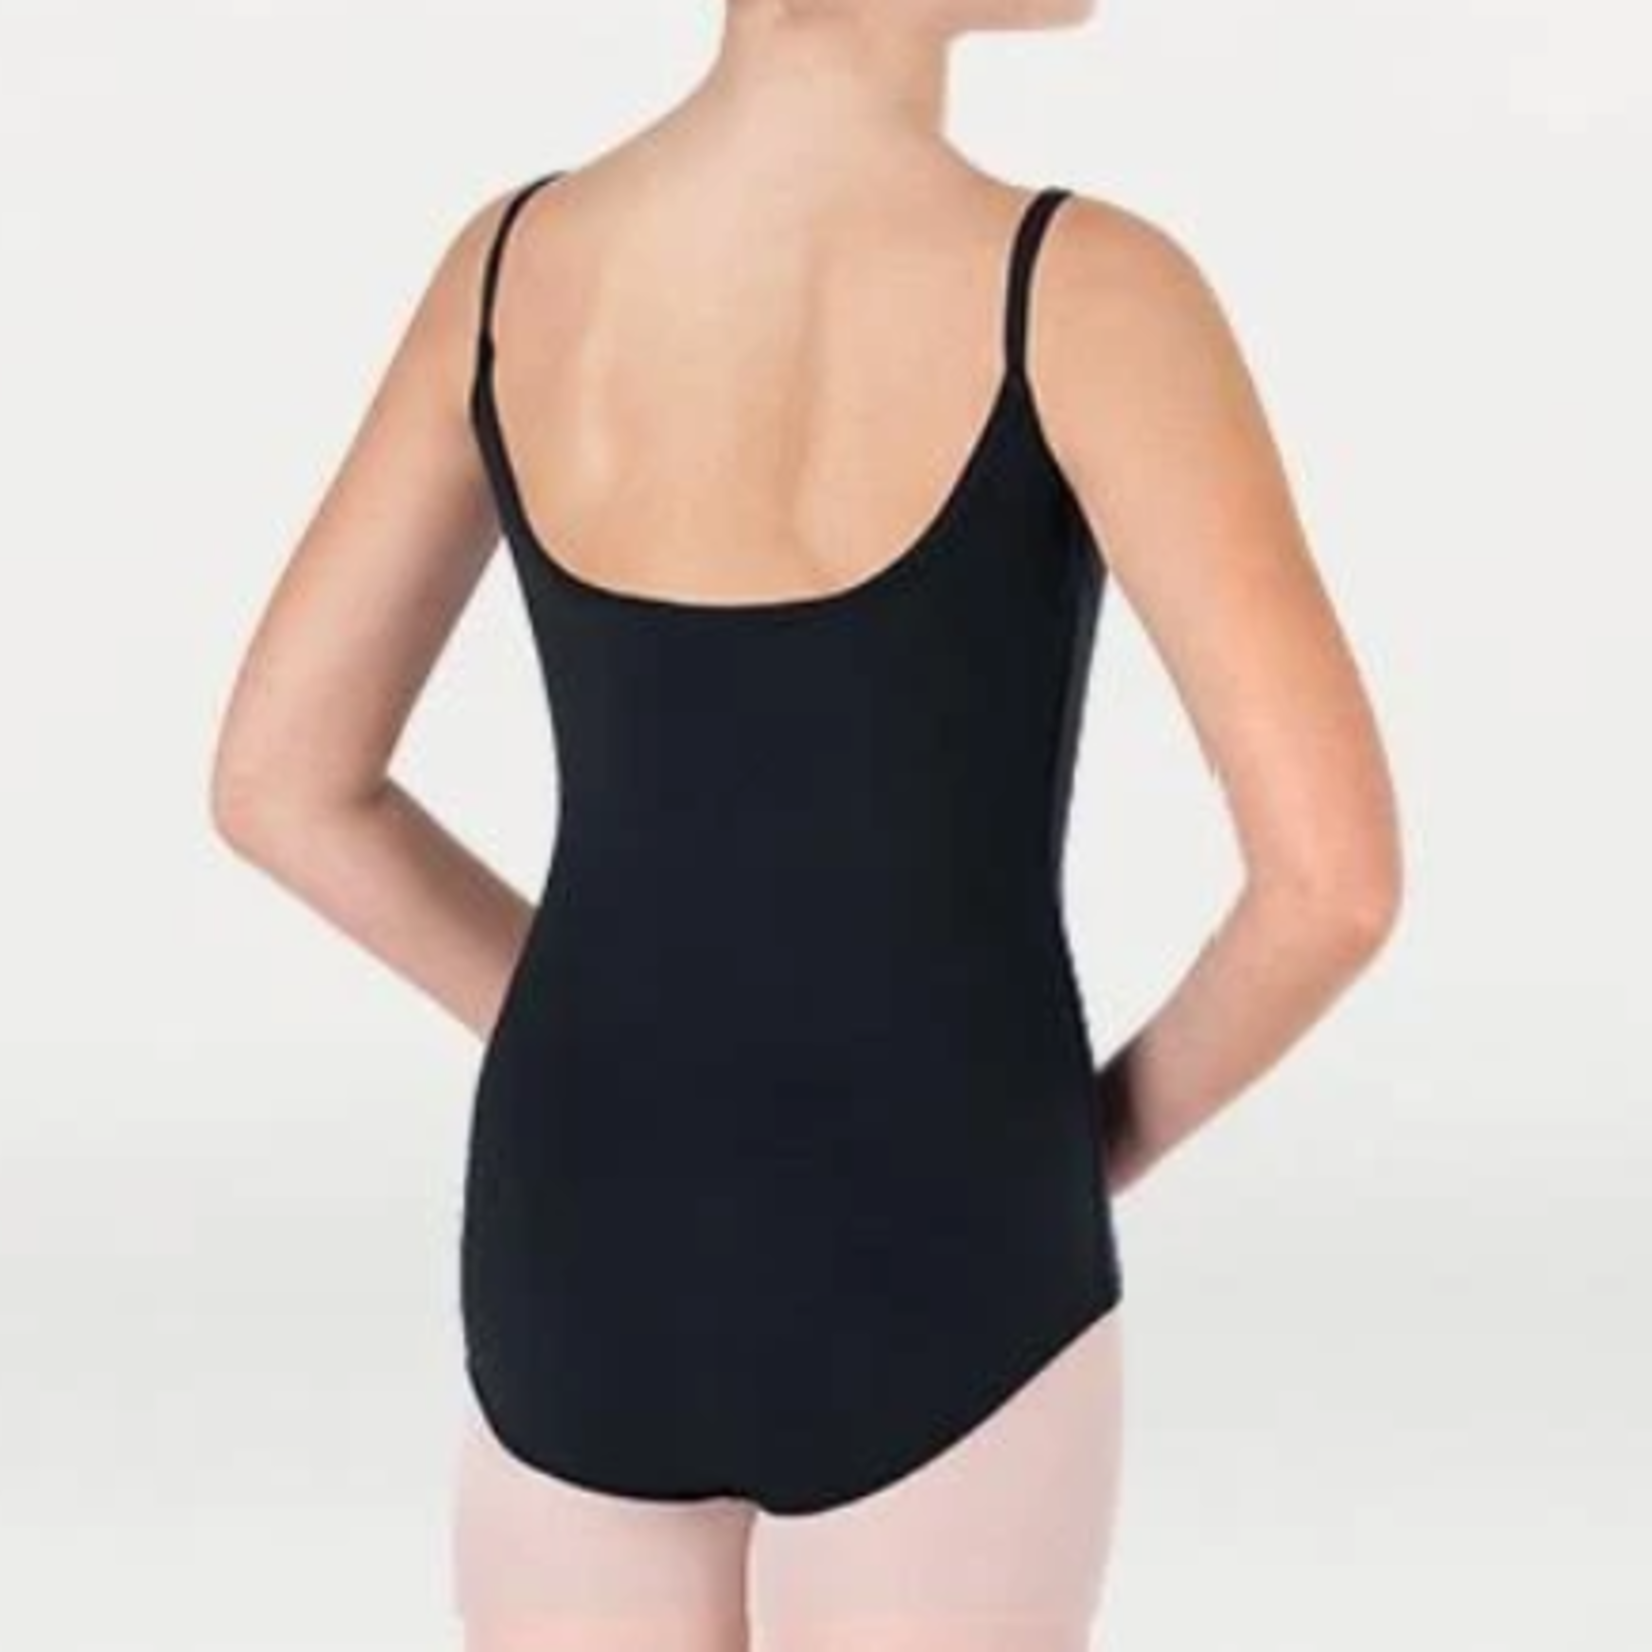 Body Wrappers Body Wrappers BWC324 Adult Camisole Leotard